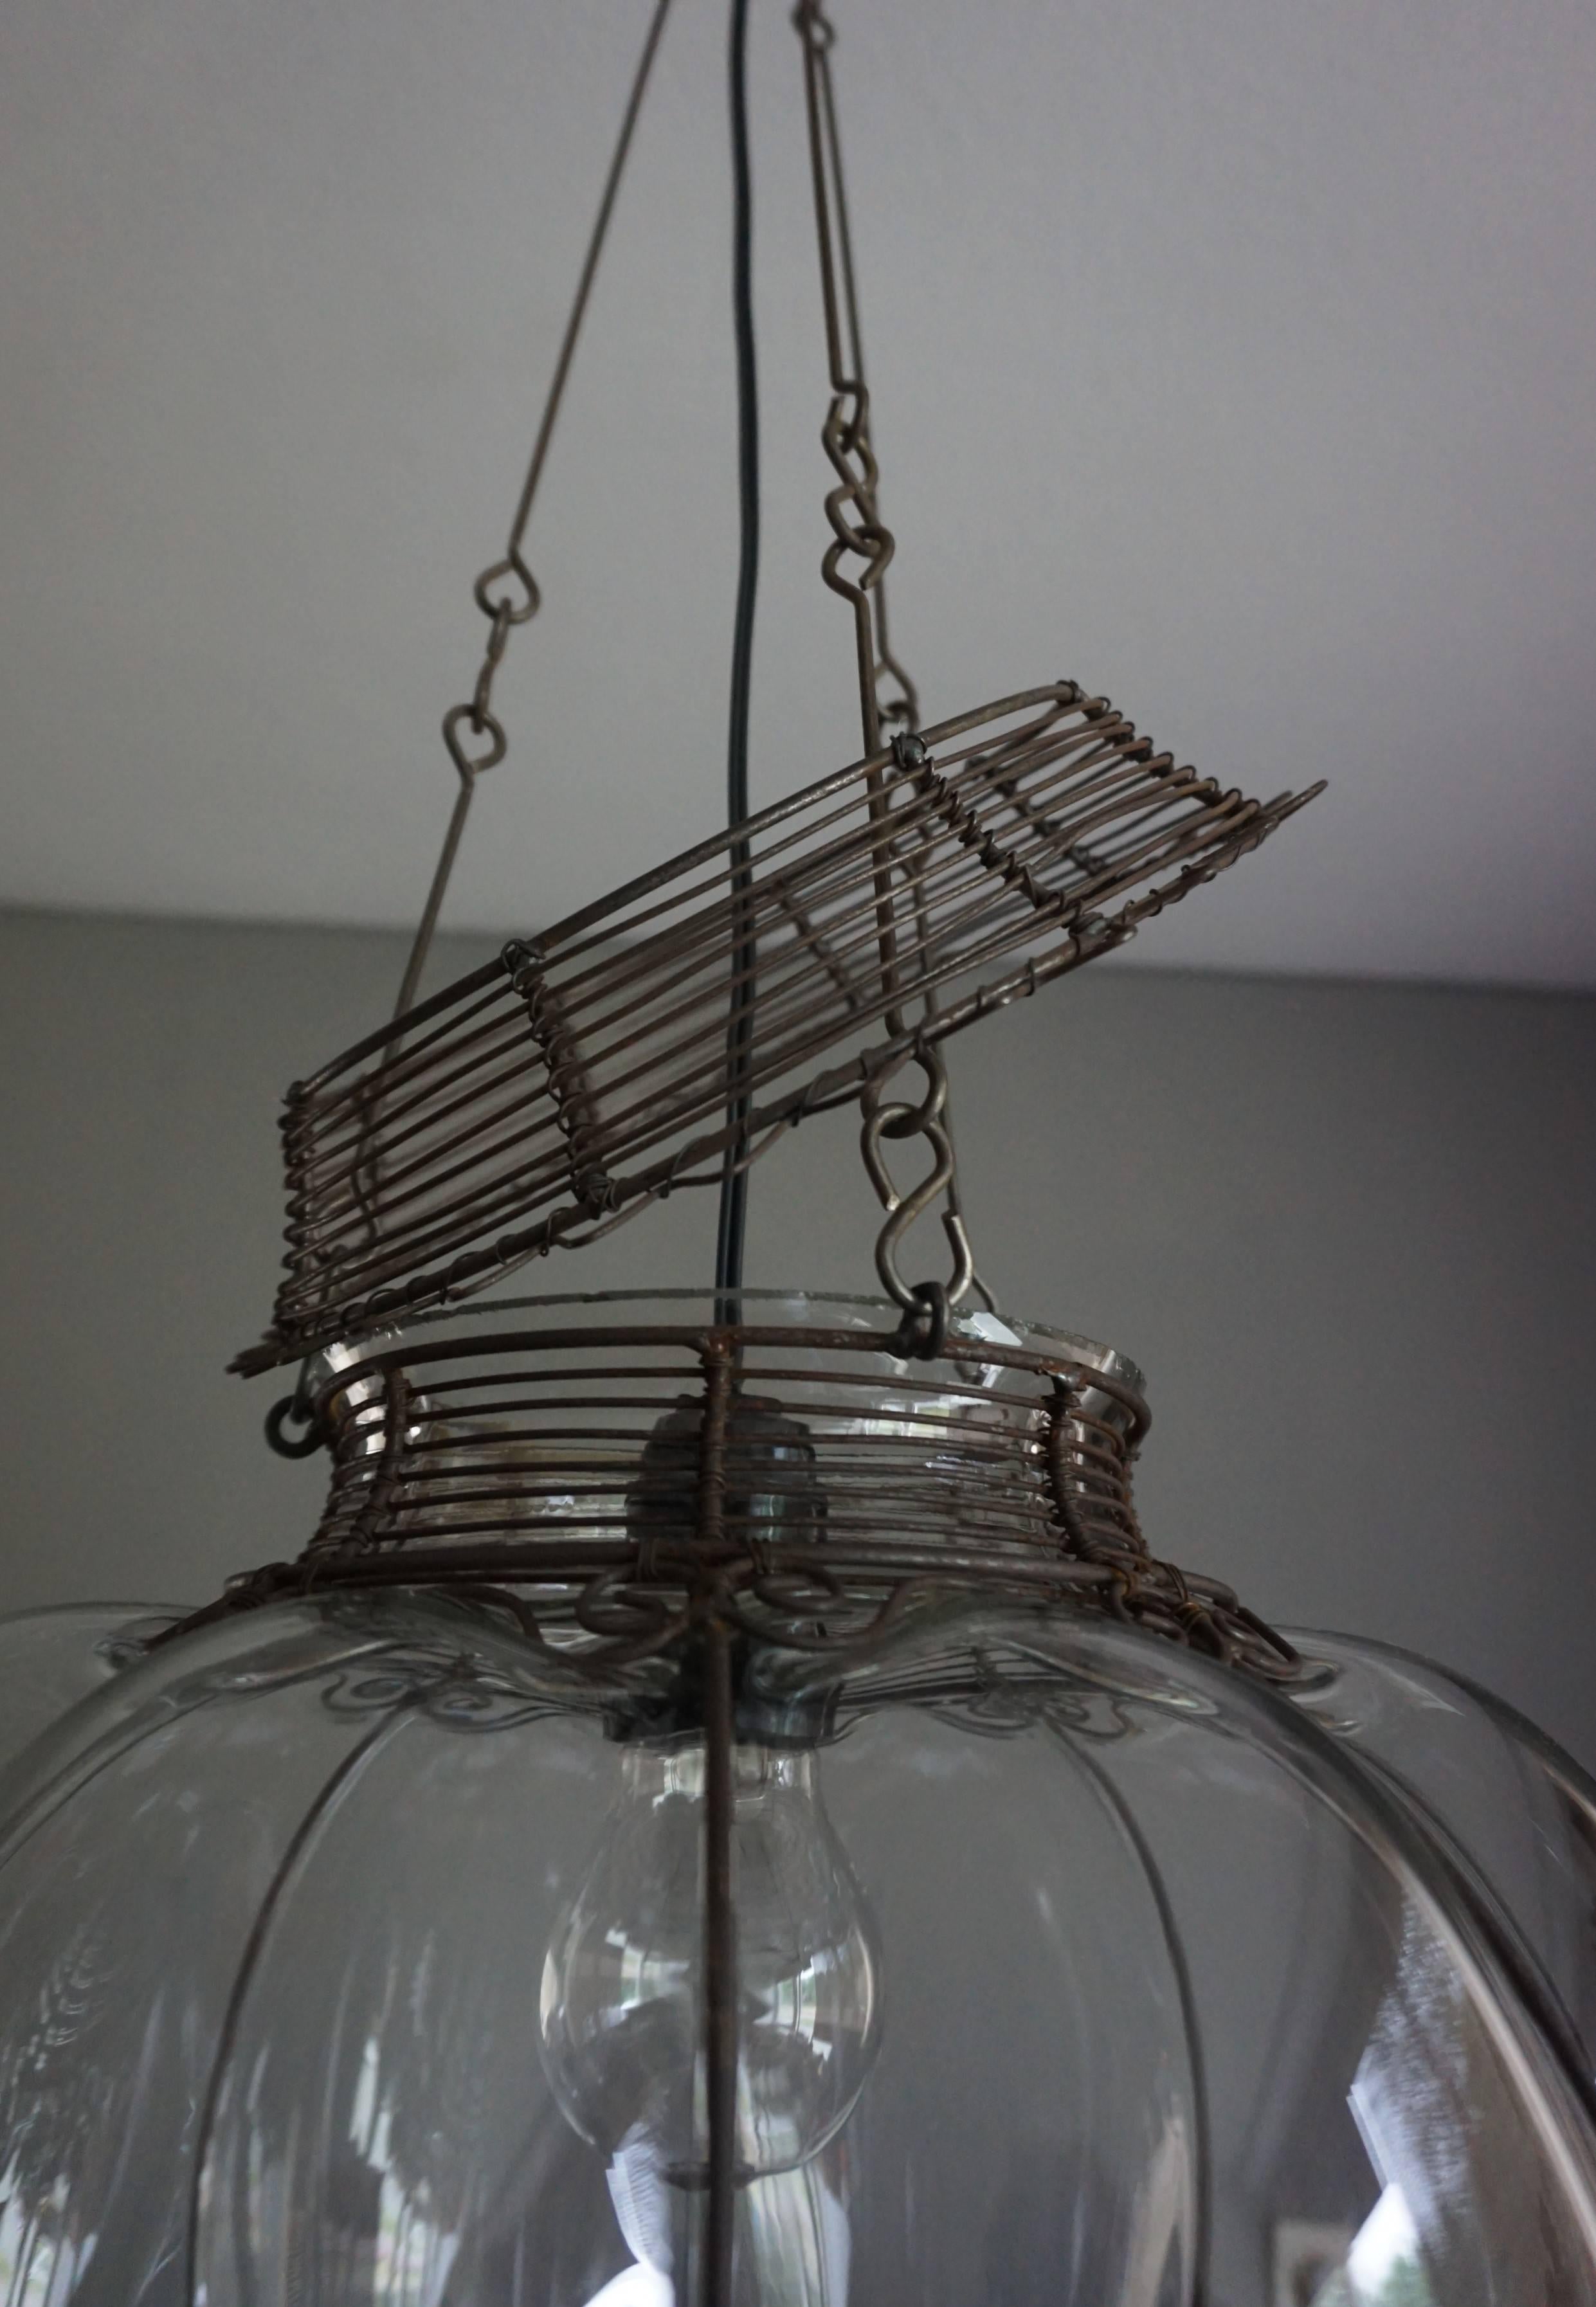 Venetian Mouthblown Glass into a Hand-crafted Iron Frame Pendant Light Fixture For Sale 5